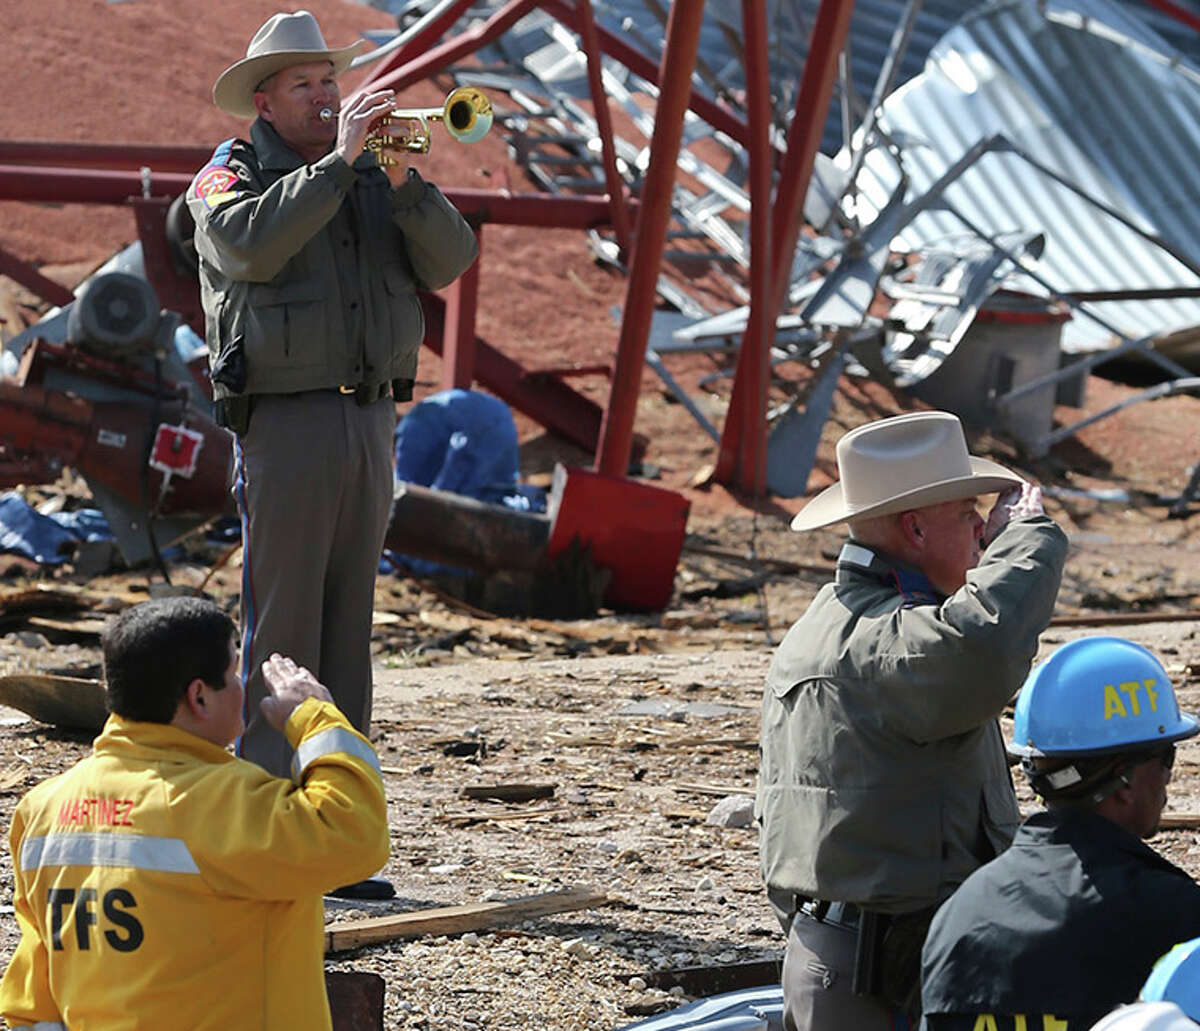 An officer sounds taps at a memorial ceremony at the site of the fire and explosion in West, Texas on April 24 2013.